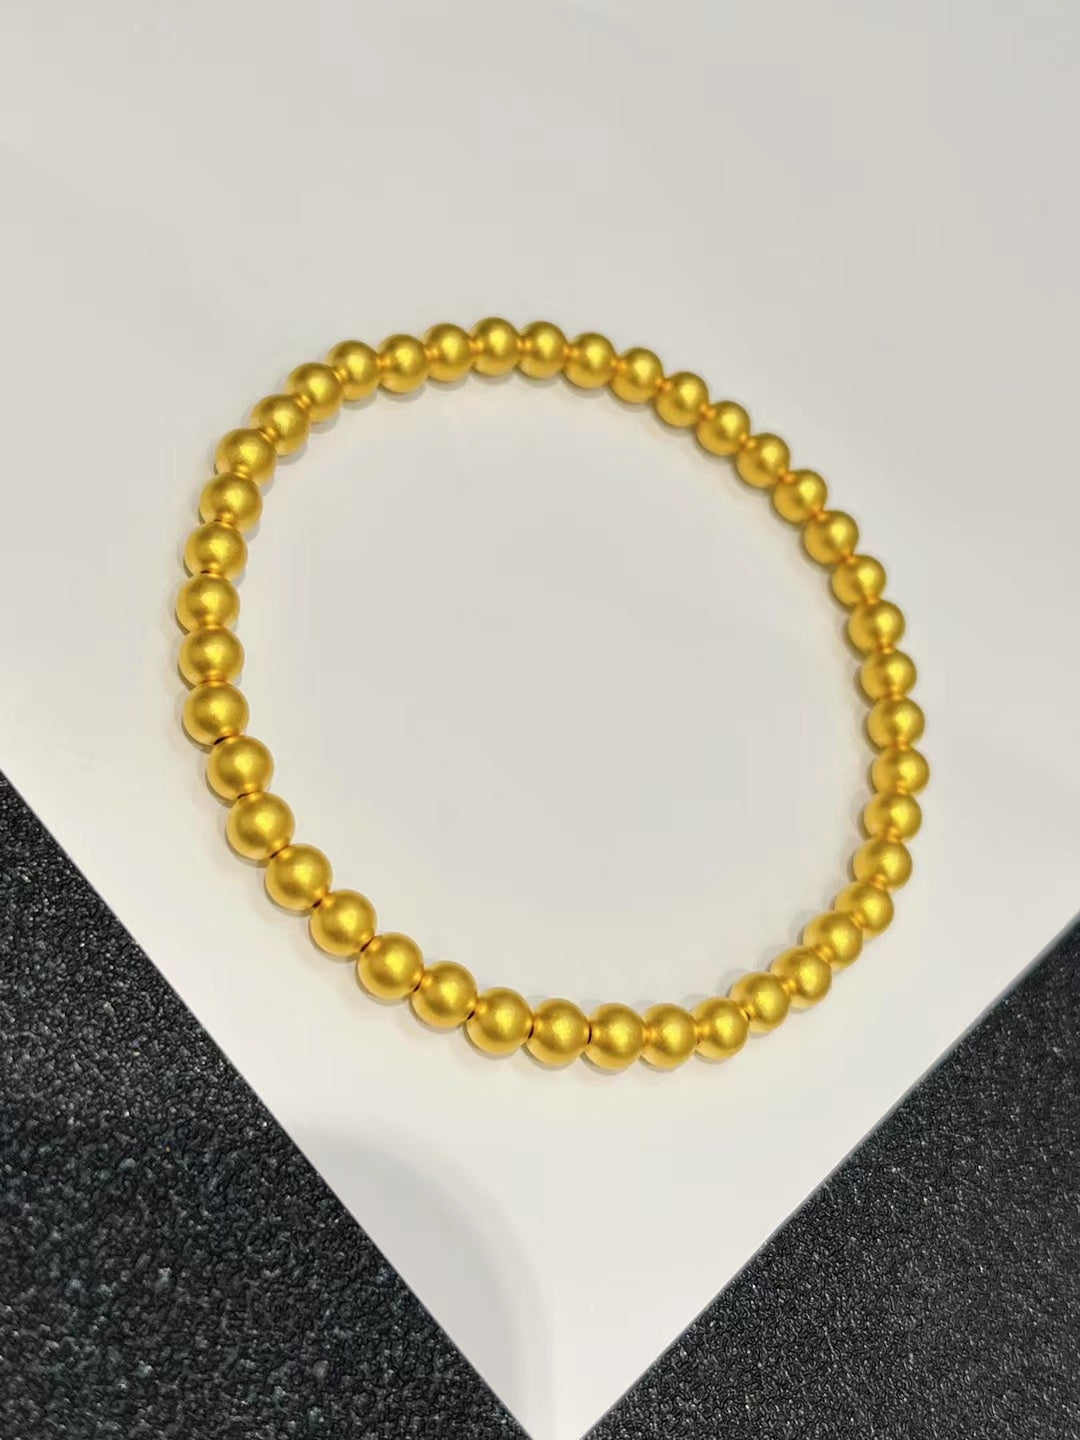 Bead Bead Hand String 999 Full Gold Material 5D Cyanide Free